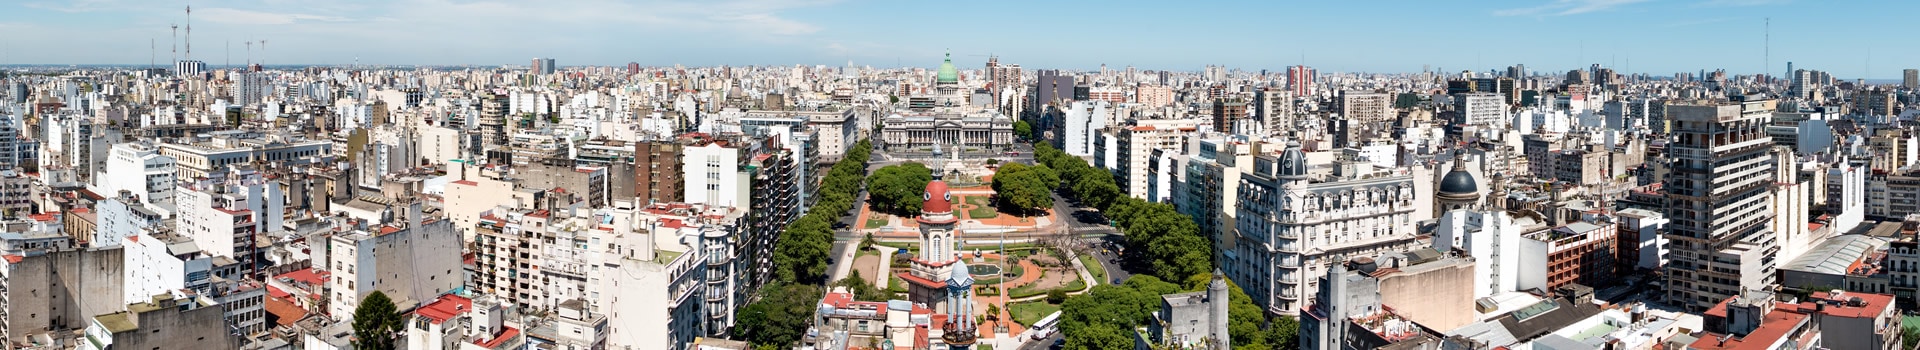 Lima - Buenos aires